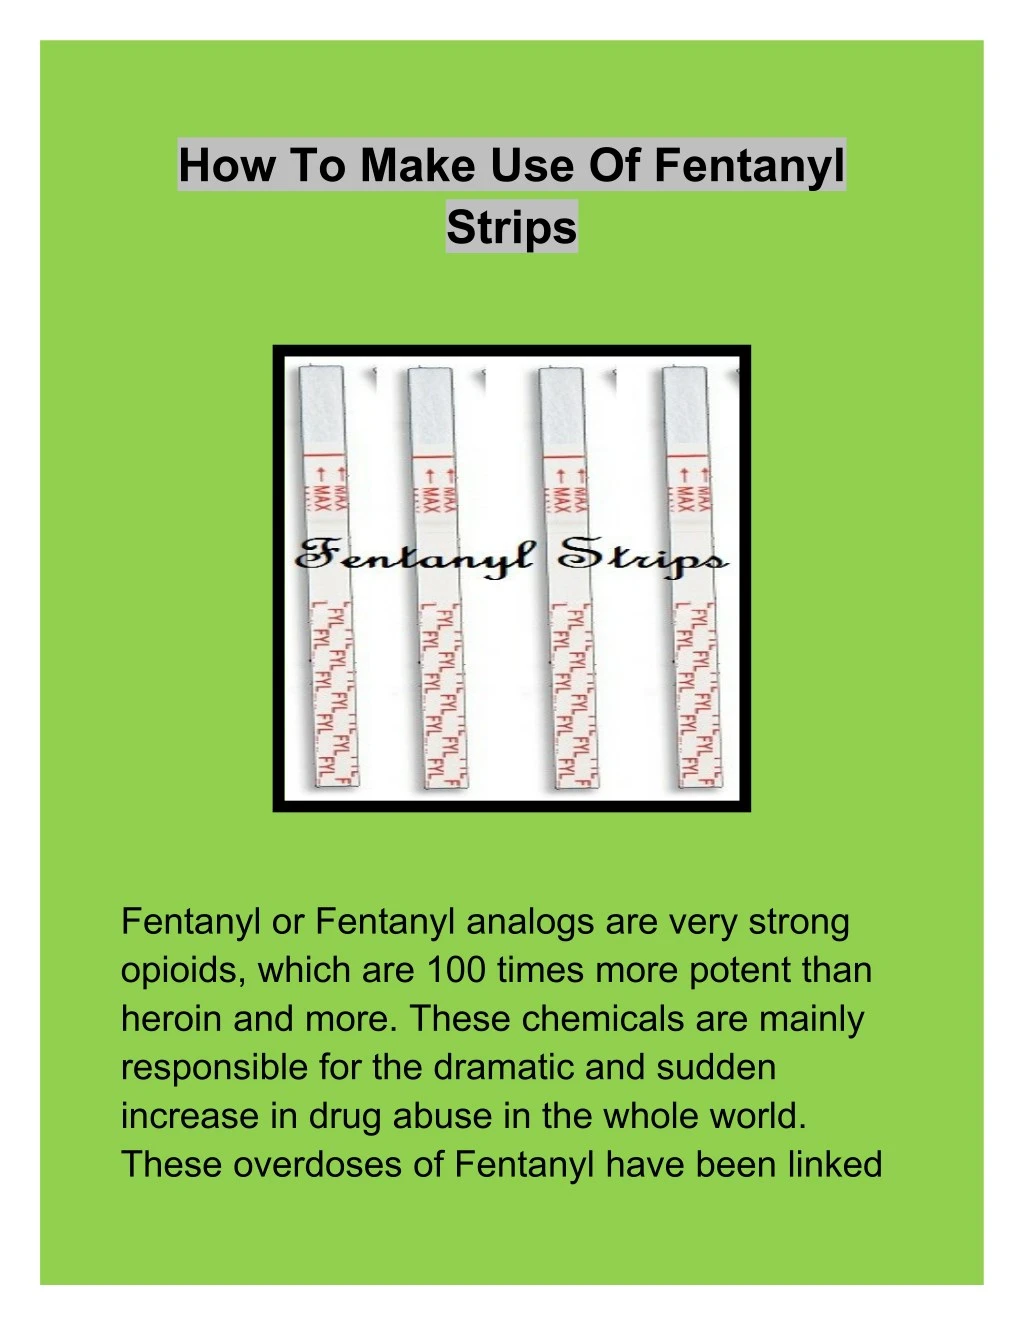 how to make use of fentanyl strips